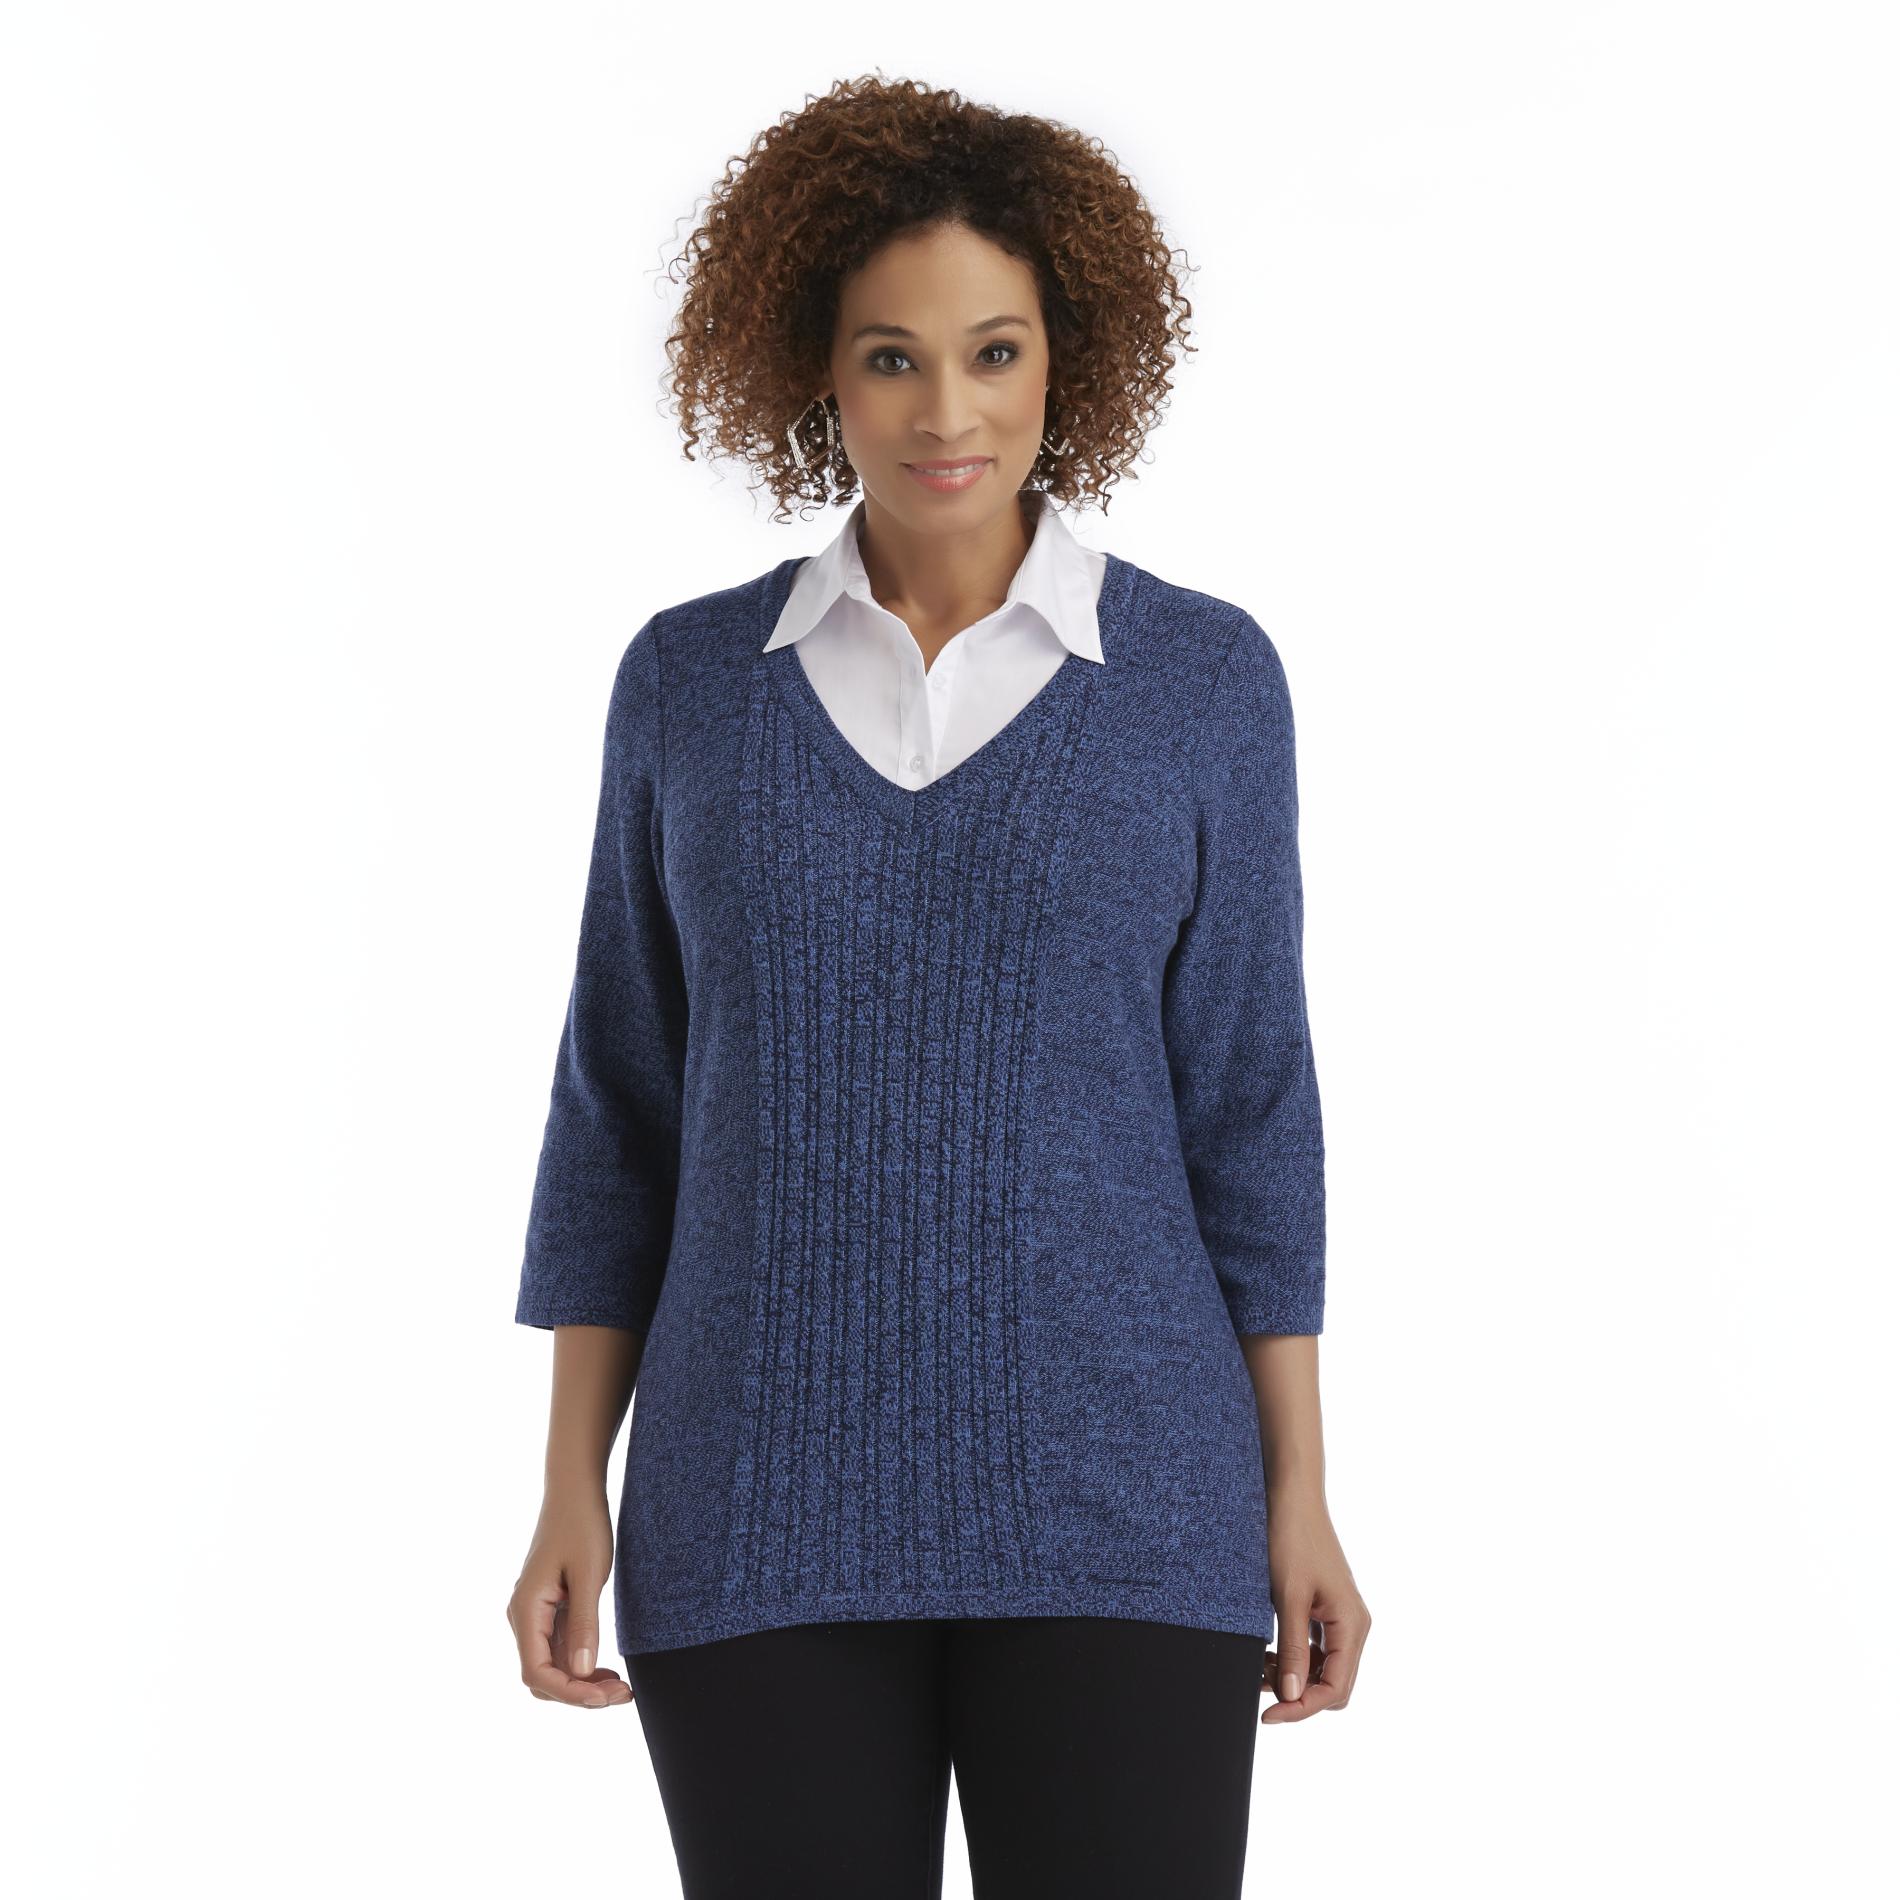 Basic Editions Women's Plus Layered-Look Sweater